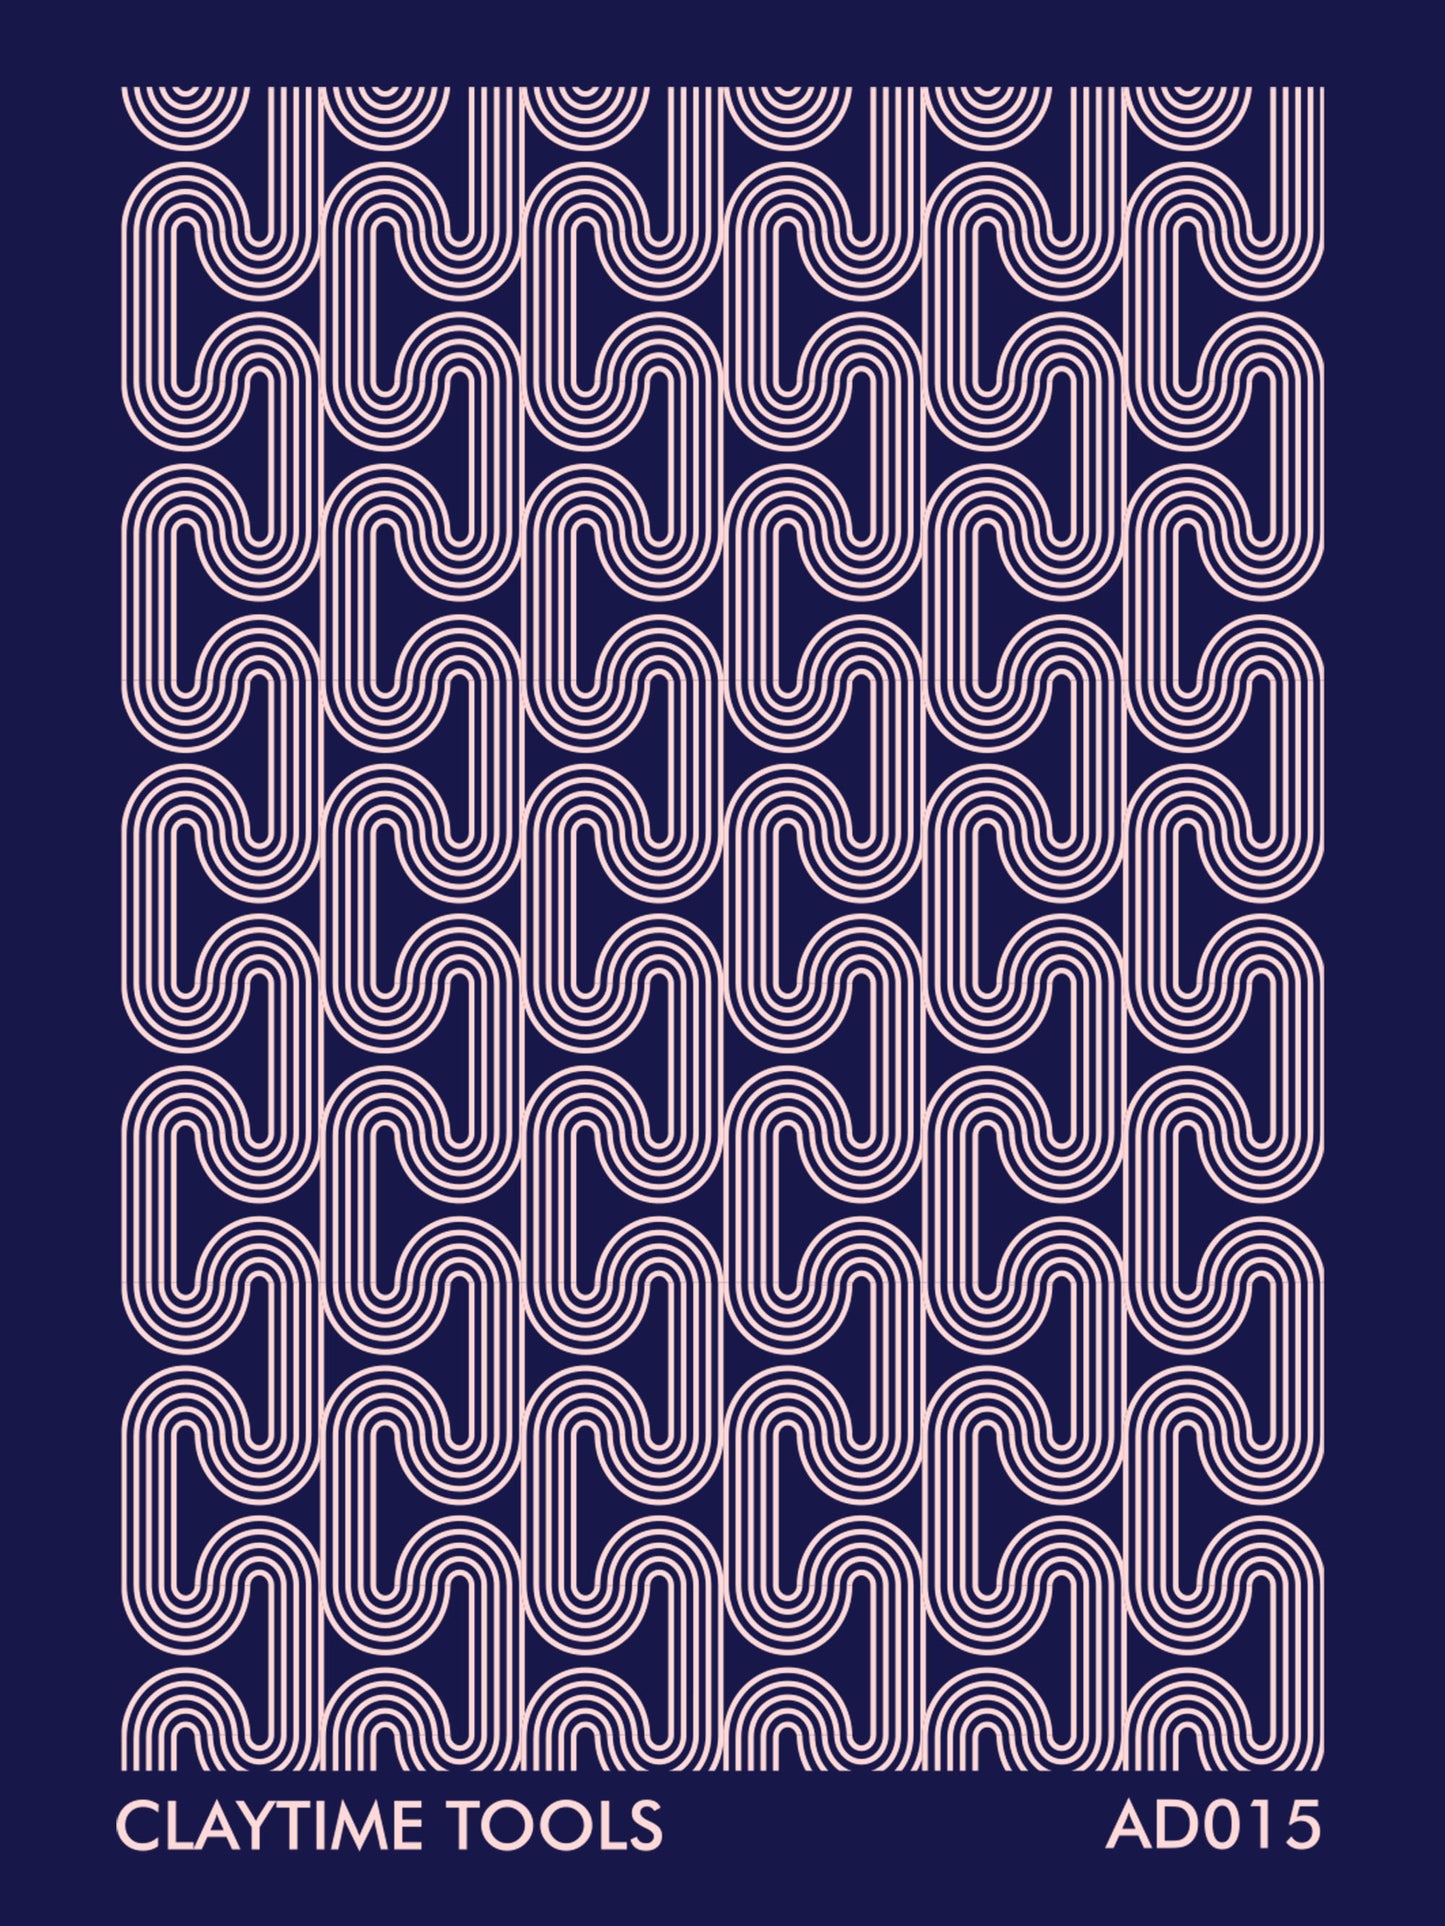 Art deco tubes motif in a blue background.